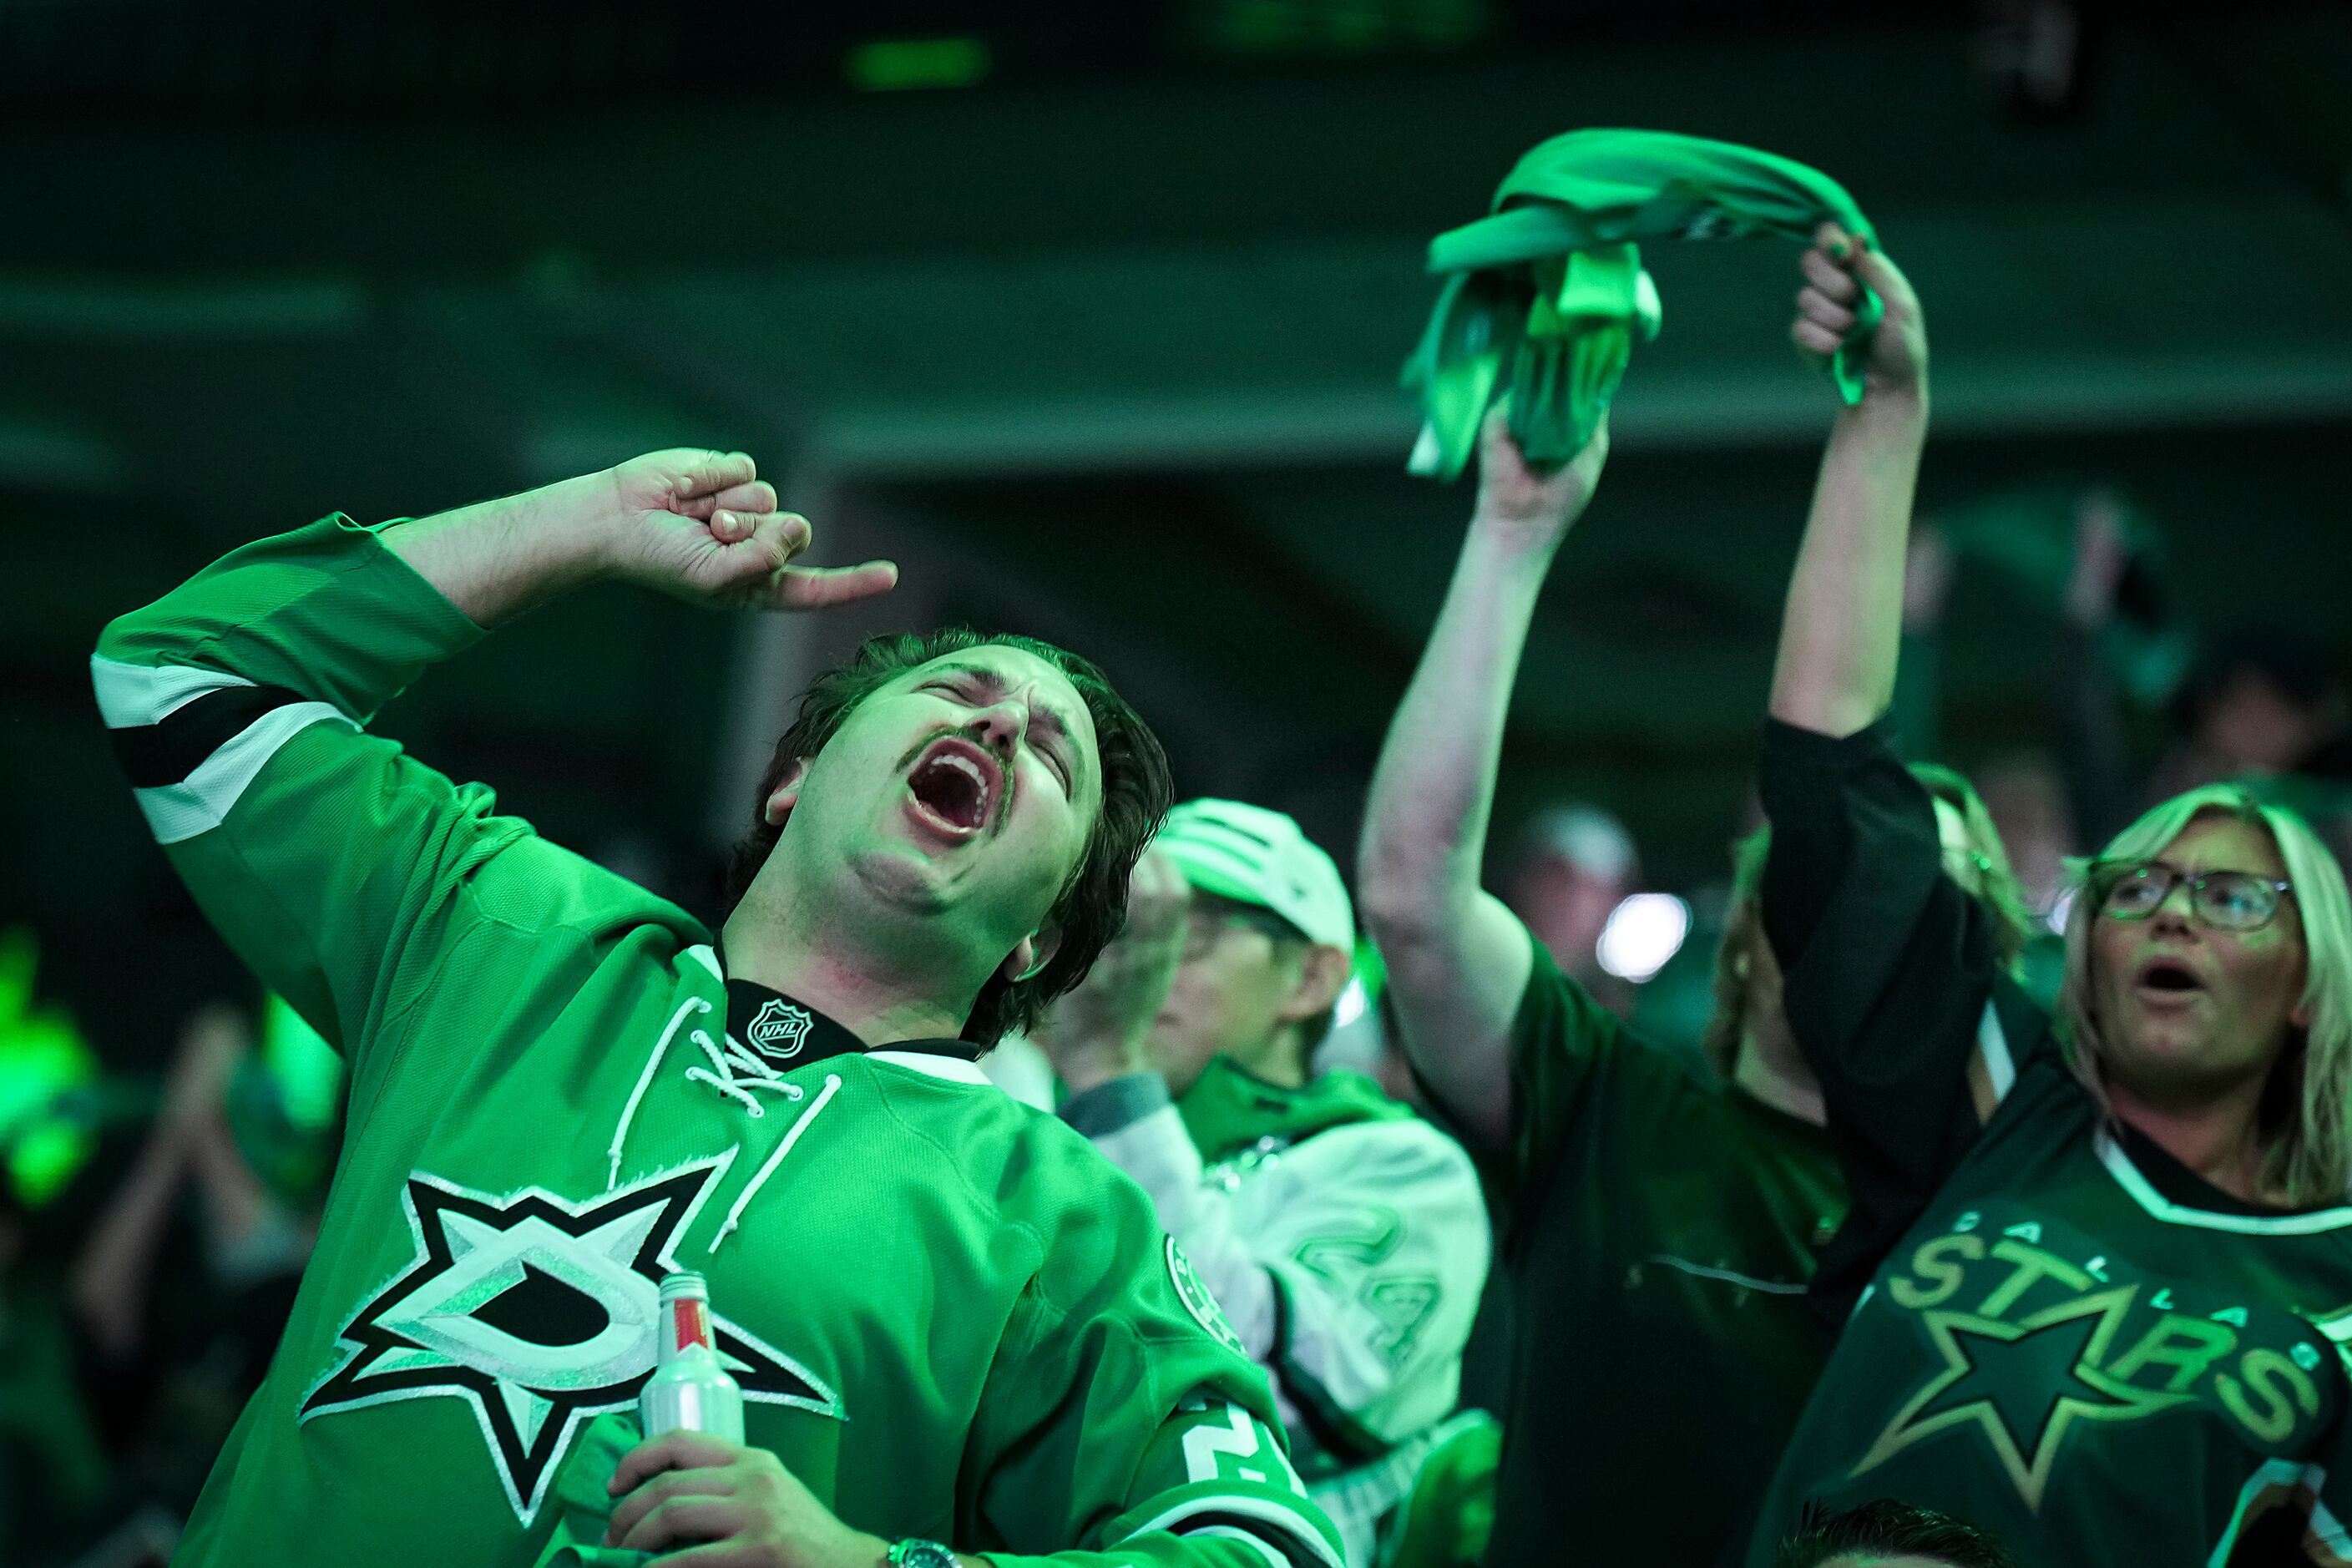 NHL Shop - Celebrate the Dallas Stars as they head to the #StanleyCup Final  as Western Conference Champs! #GoStars